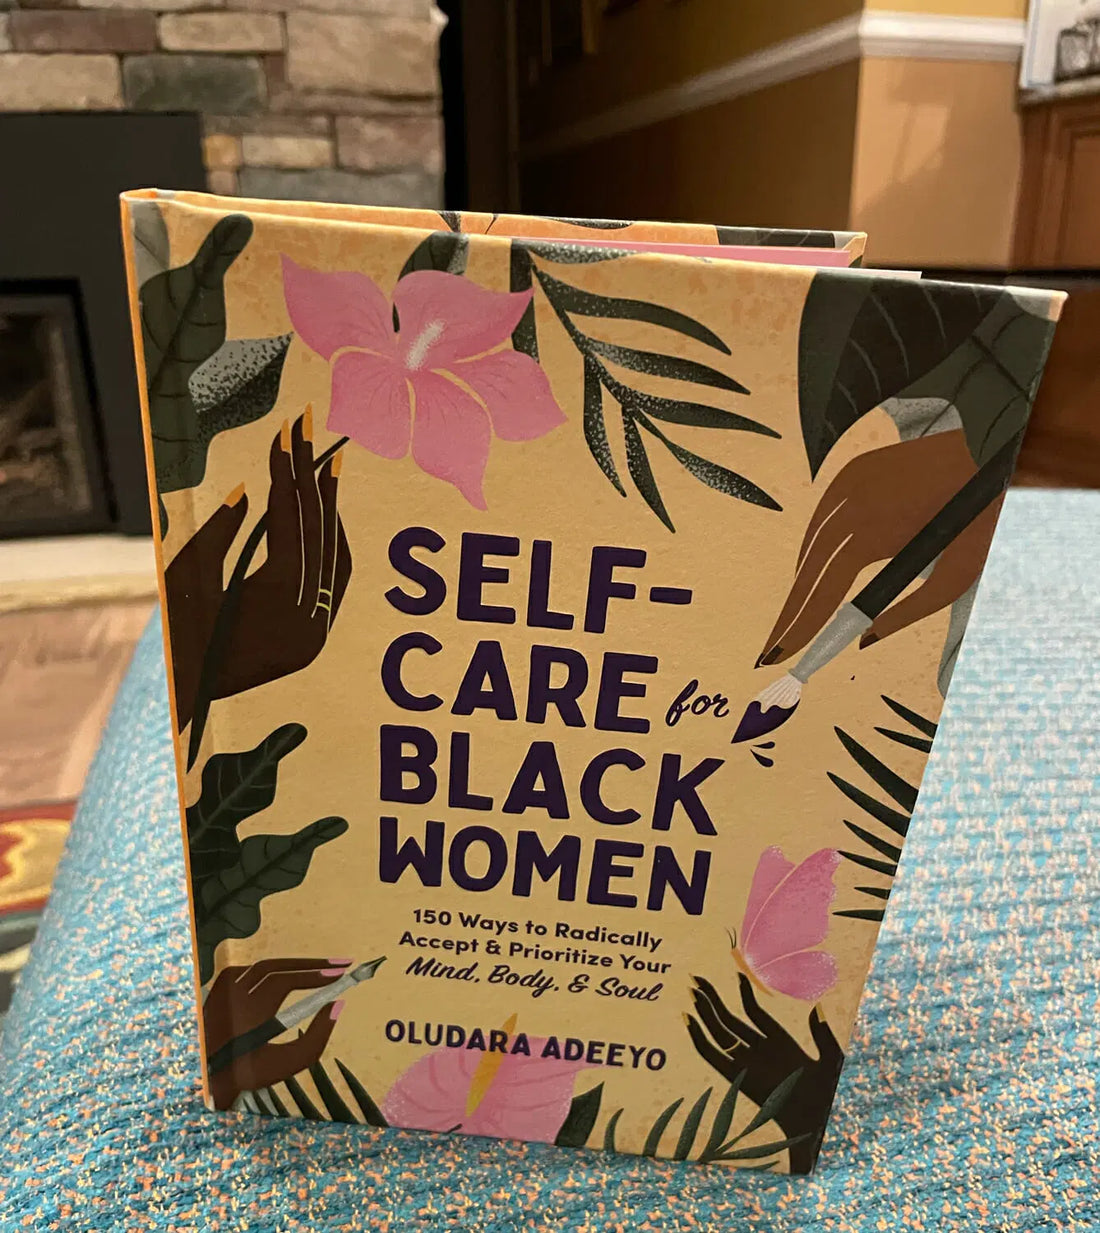 Self-Care for Black Women: 150 Ways to Radically Accept and Prioritize Your Mind, Body and Soul.